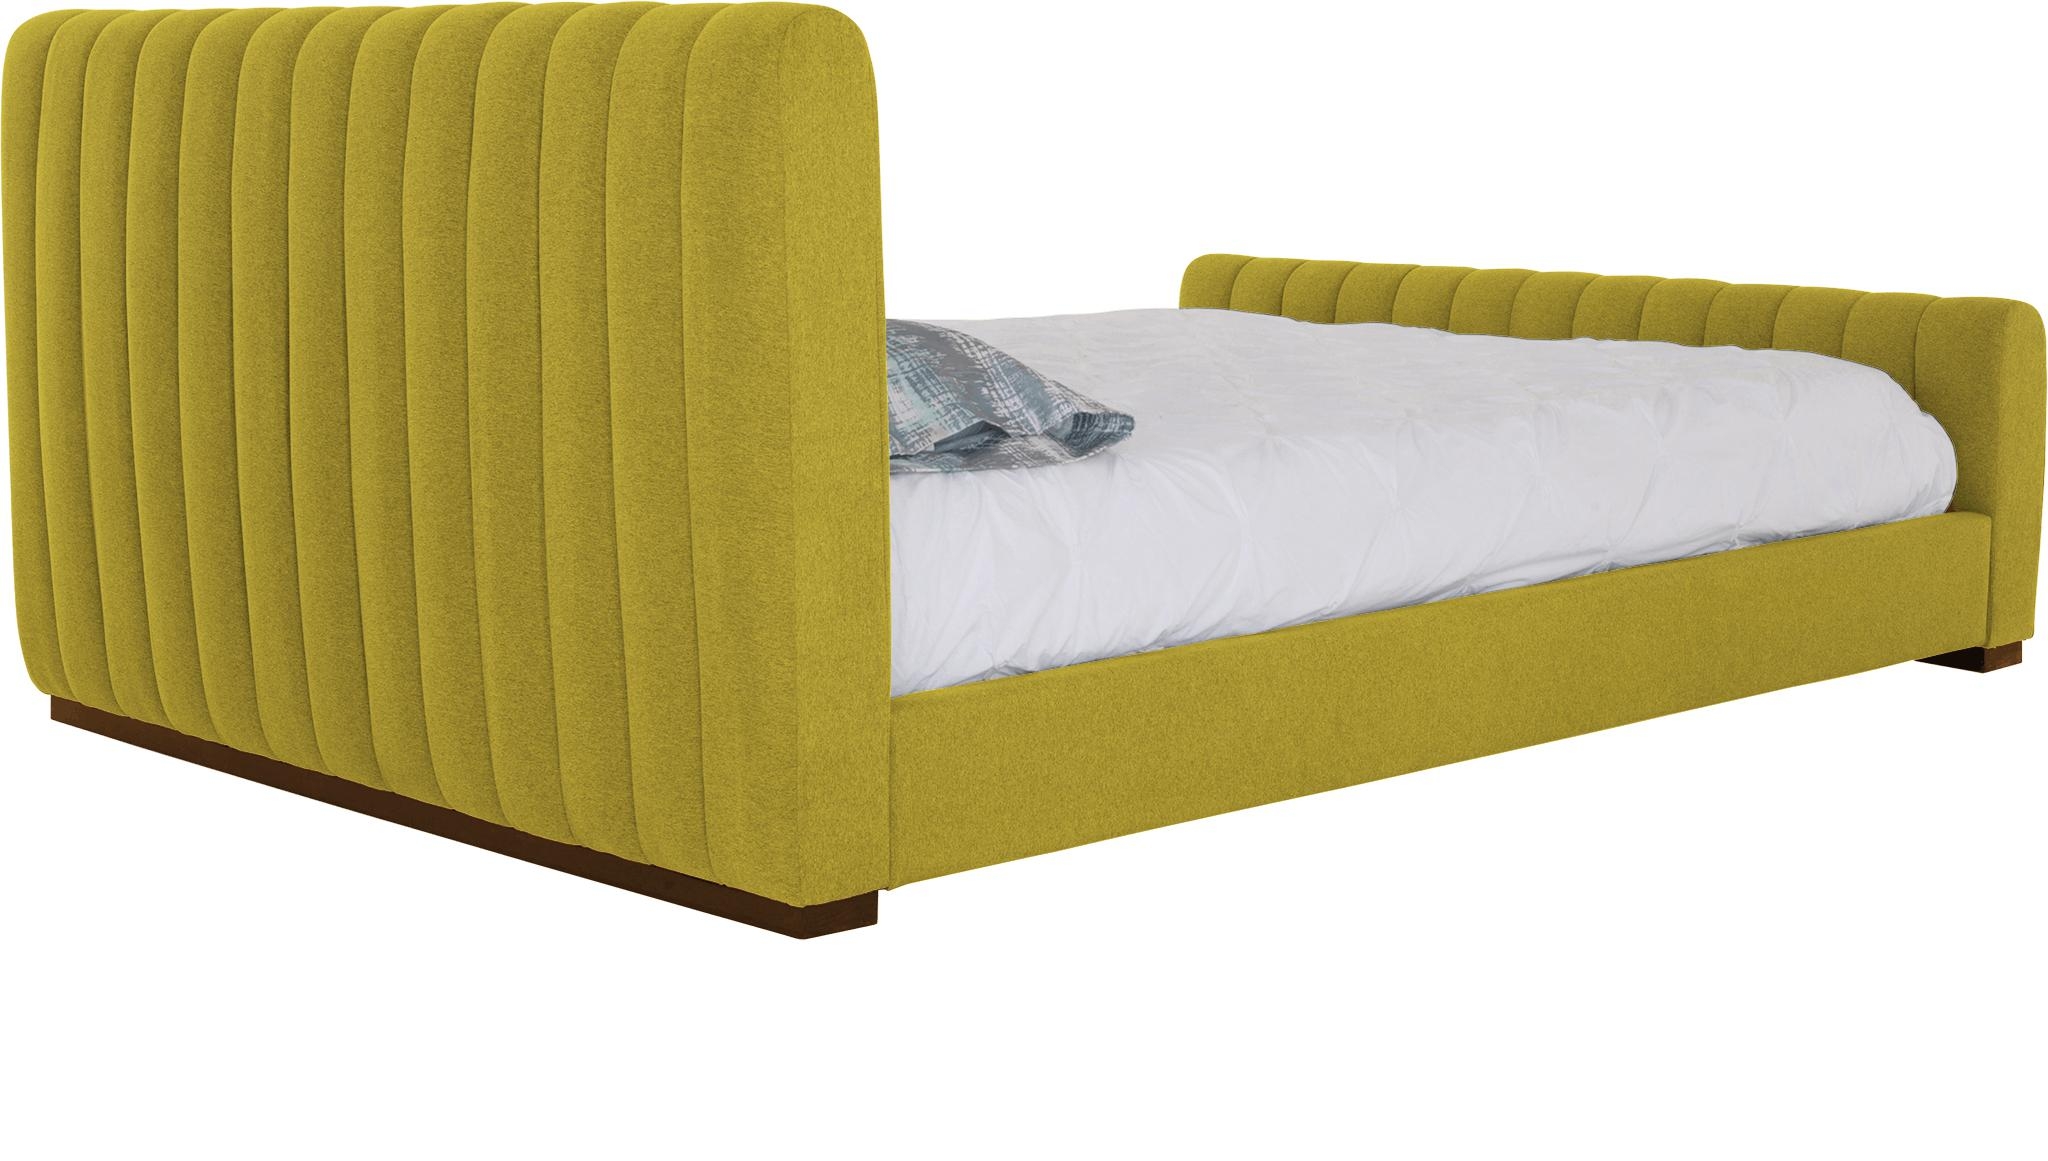 Yellow Camille Mid Century Modern Bed - Bloke Goldenrod - Mocha - Queen - Image 3